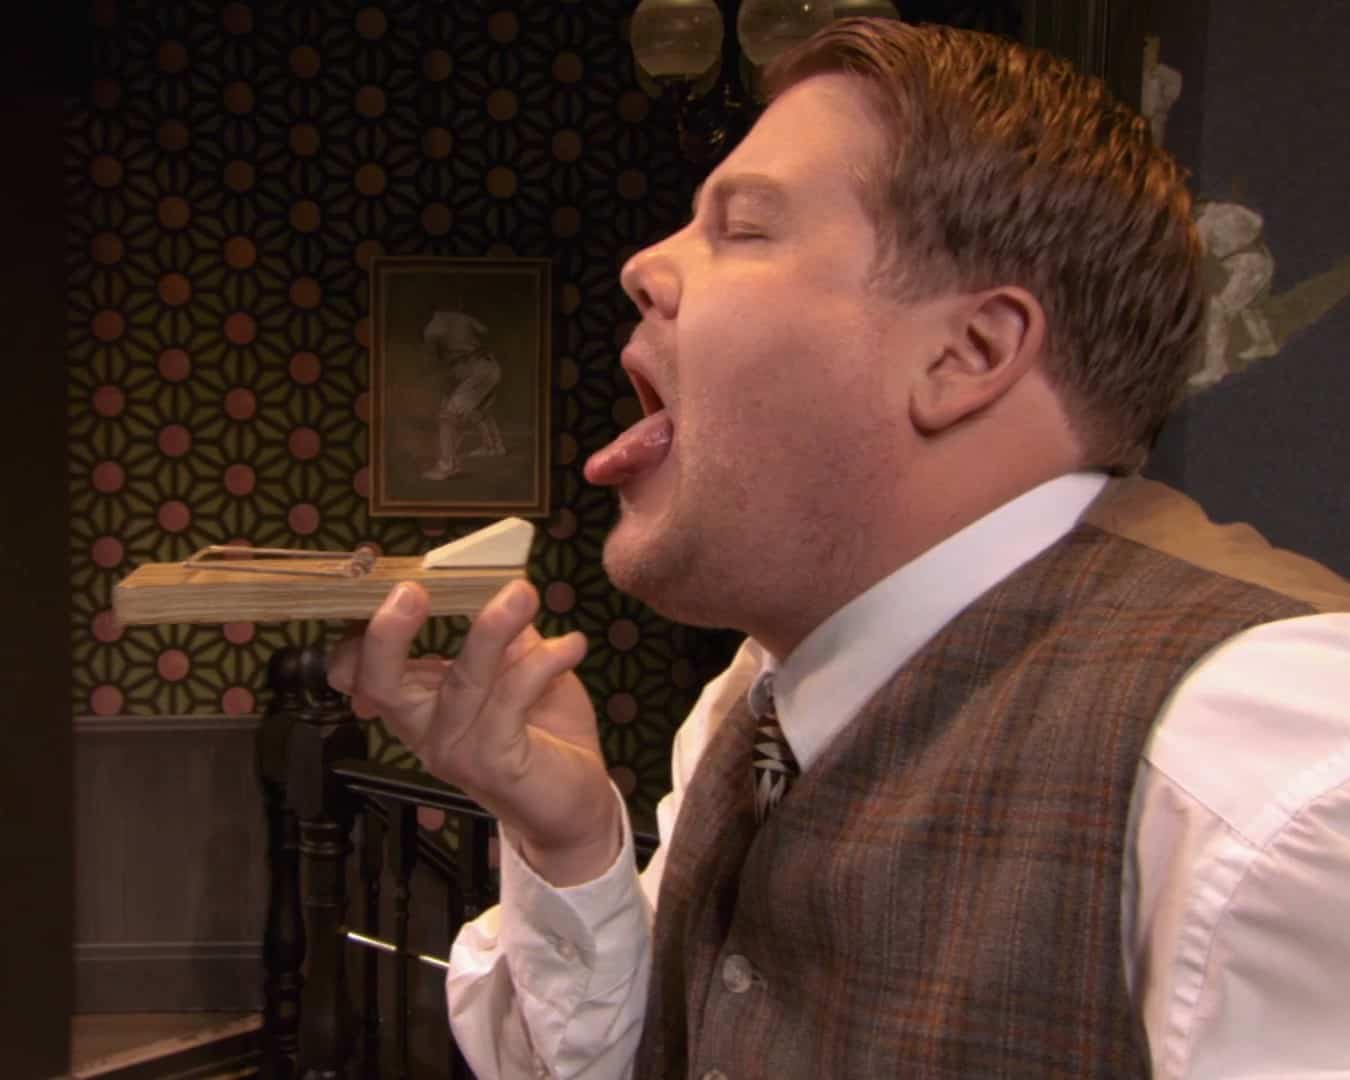 James Corden took the lead role in the popular comedy play "One Man, Two Guvnors"